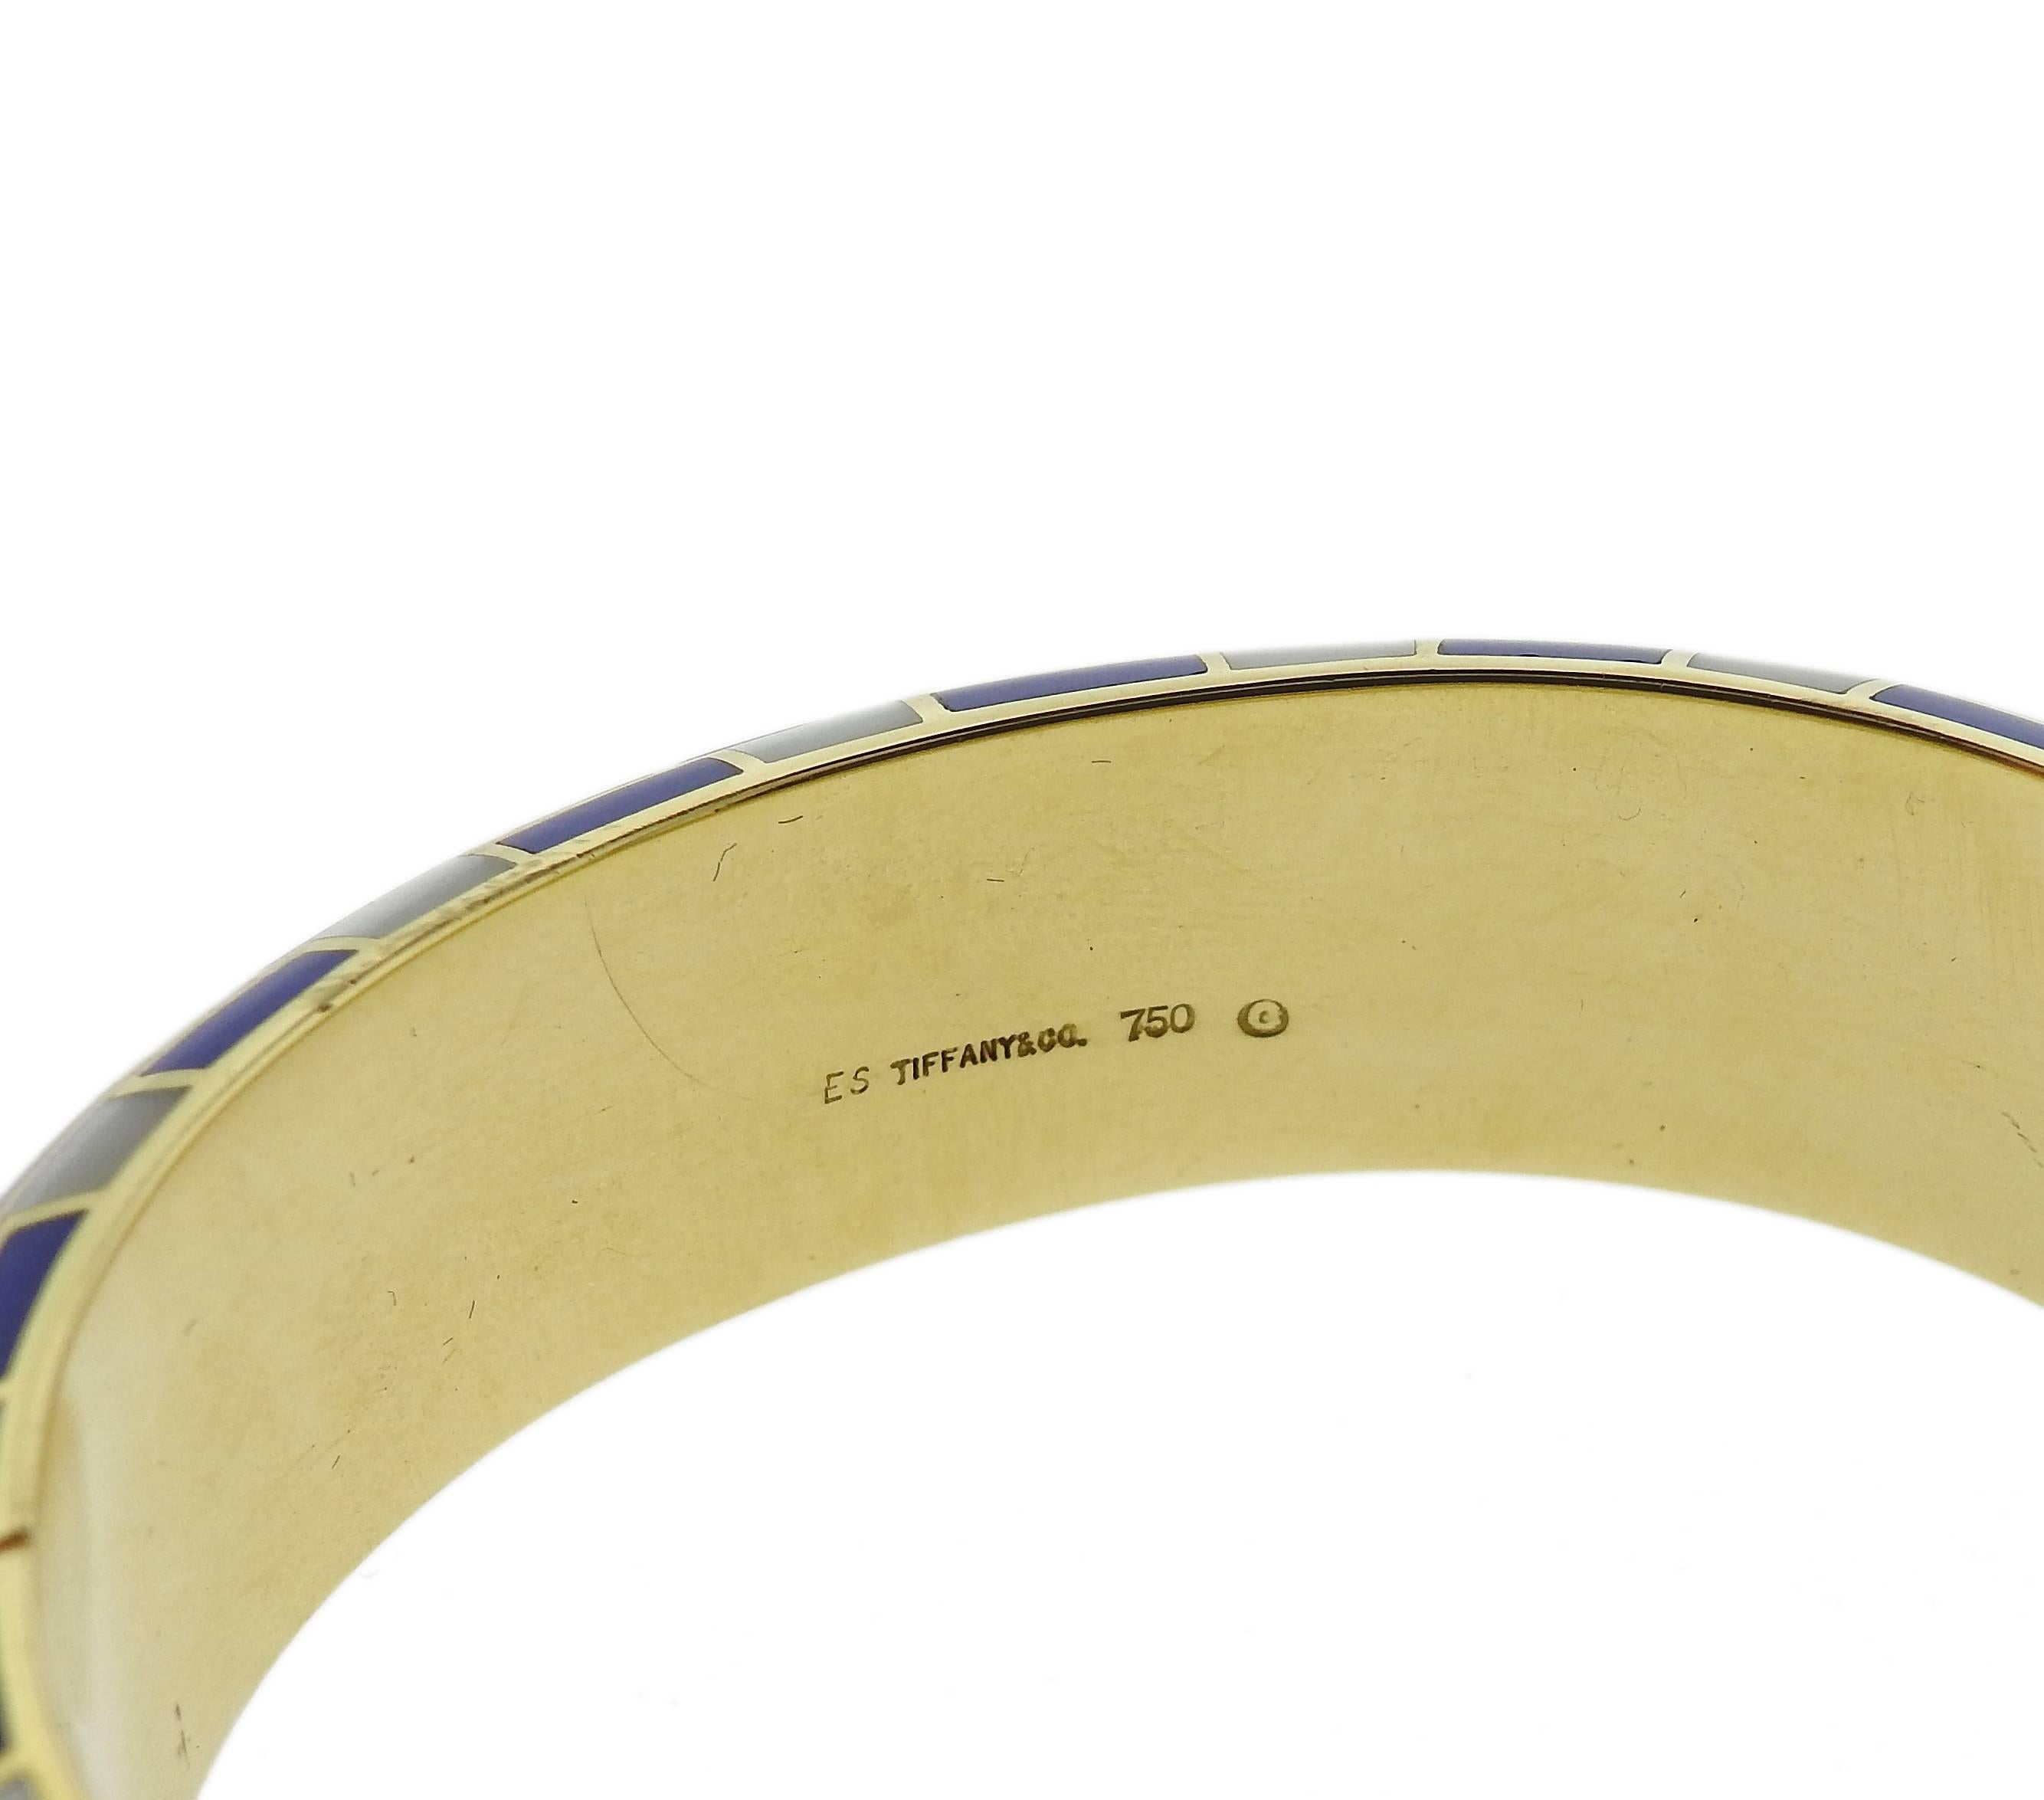 An 18k yellow gold bangle bracelet, crafted by Tiffany & Co, set with inlay dyed blue coral and mother of pearl. Bracelet will fit up to 6 1/2" wrist and is 18mm wide. Marked: TIffany & Co, 750, ES, 346MI. Weight of the piece - 57.3